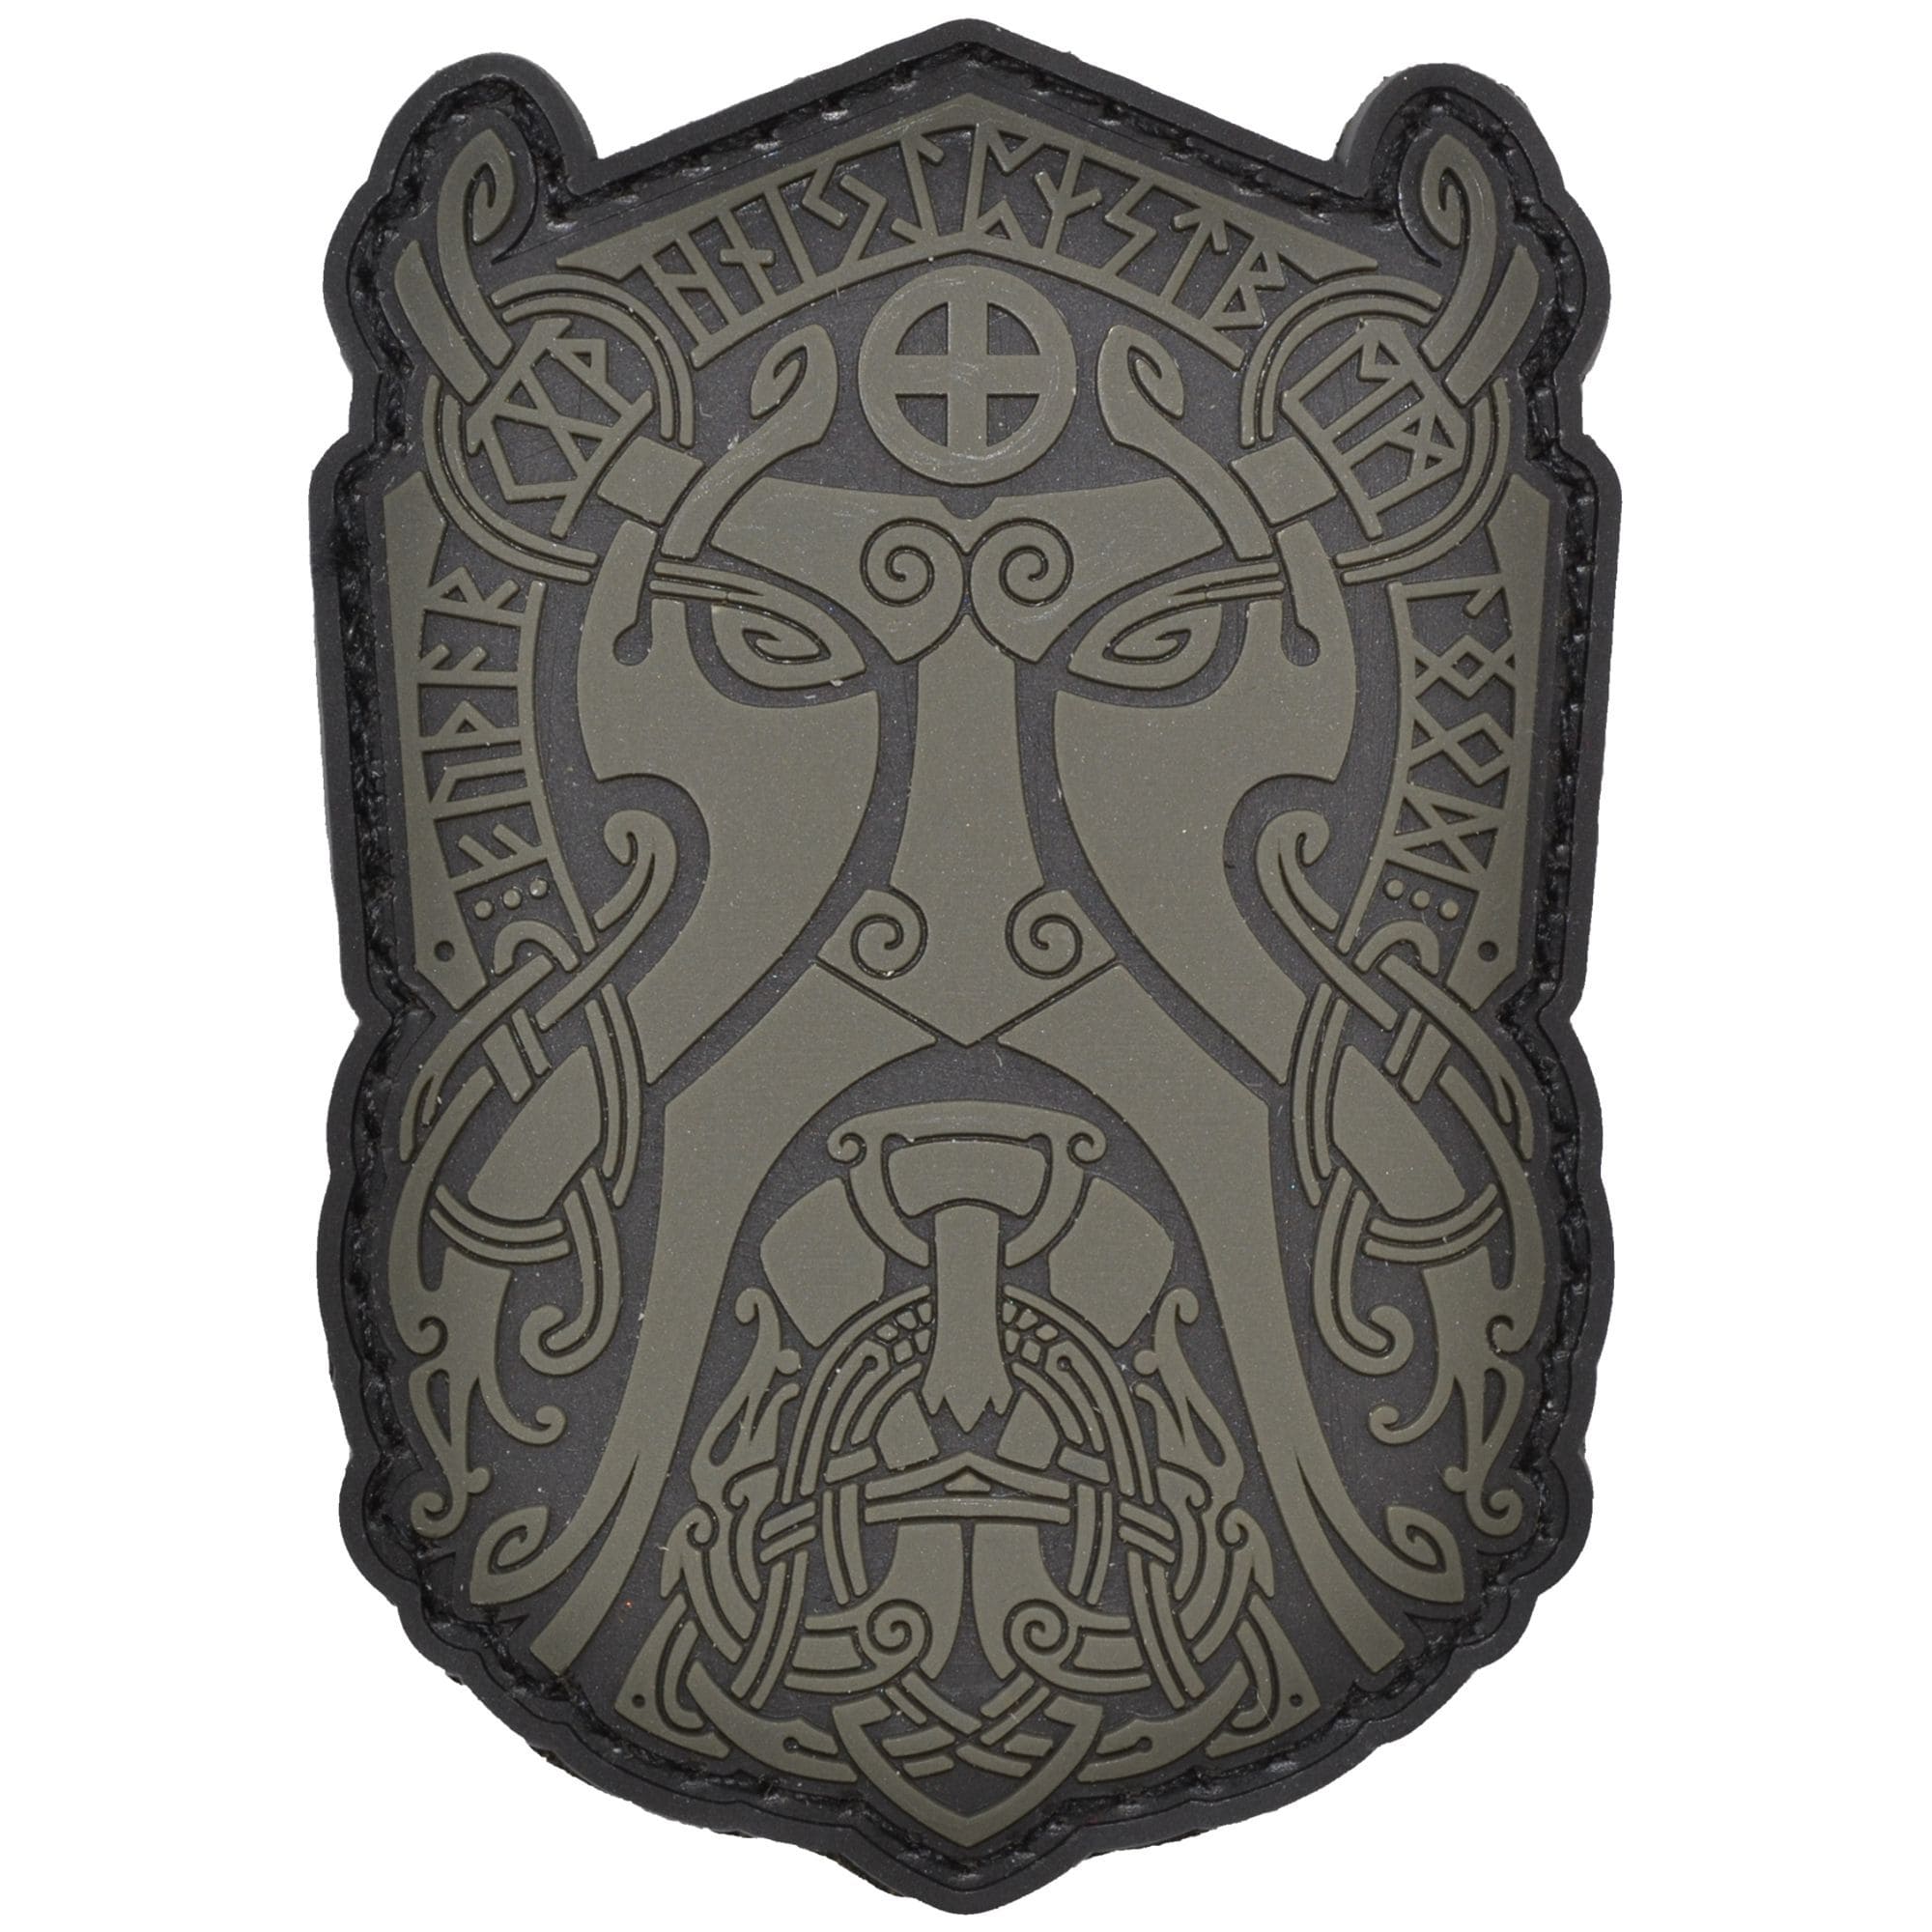 Tactical Gear Junkie Patches Olive Drab and Black Odin Norse God Viking - 2x3 PVC Patch - Multiple Colors